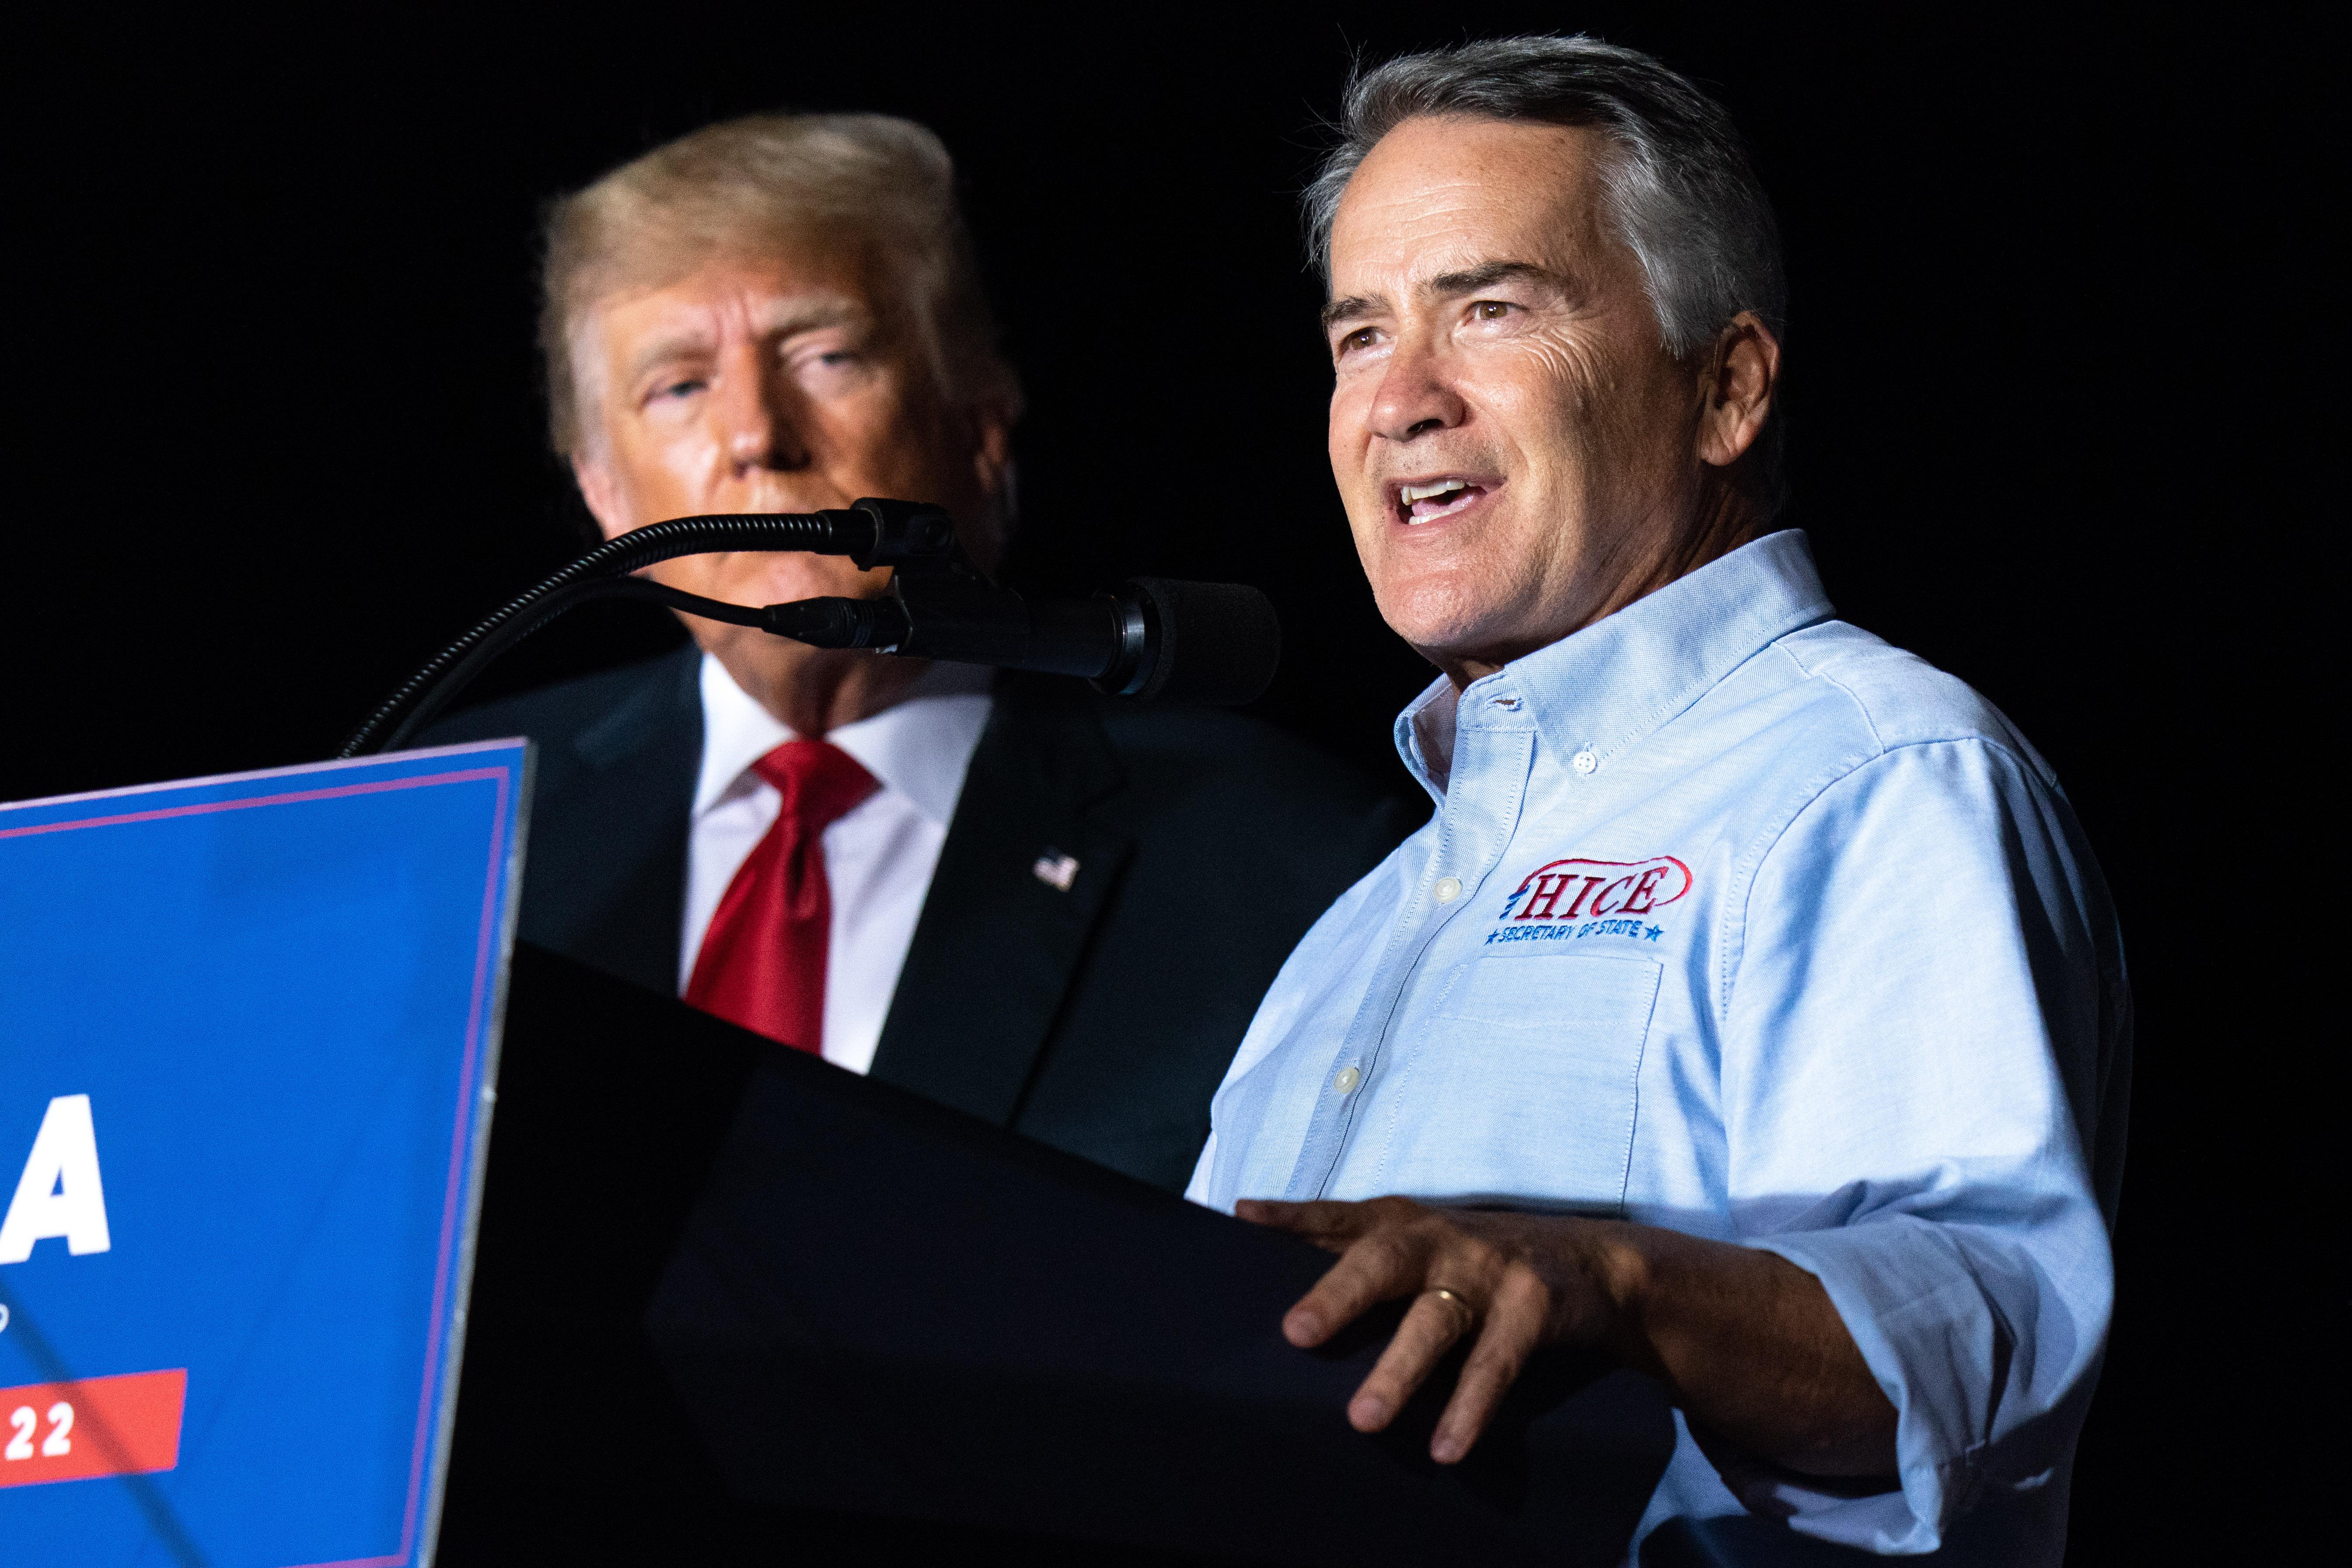 Rep. Jody Hice (R-GA) speaks to the crowd during a rally as former US President Donald Trump watches on September 25, 2021 in Perry, Georgia. 